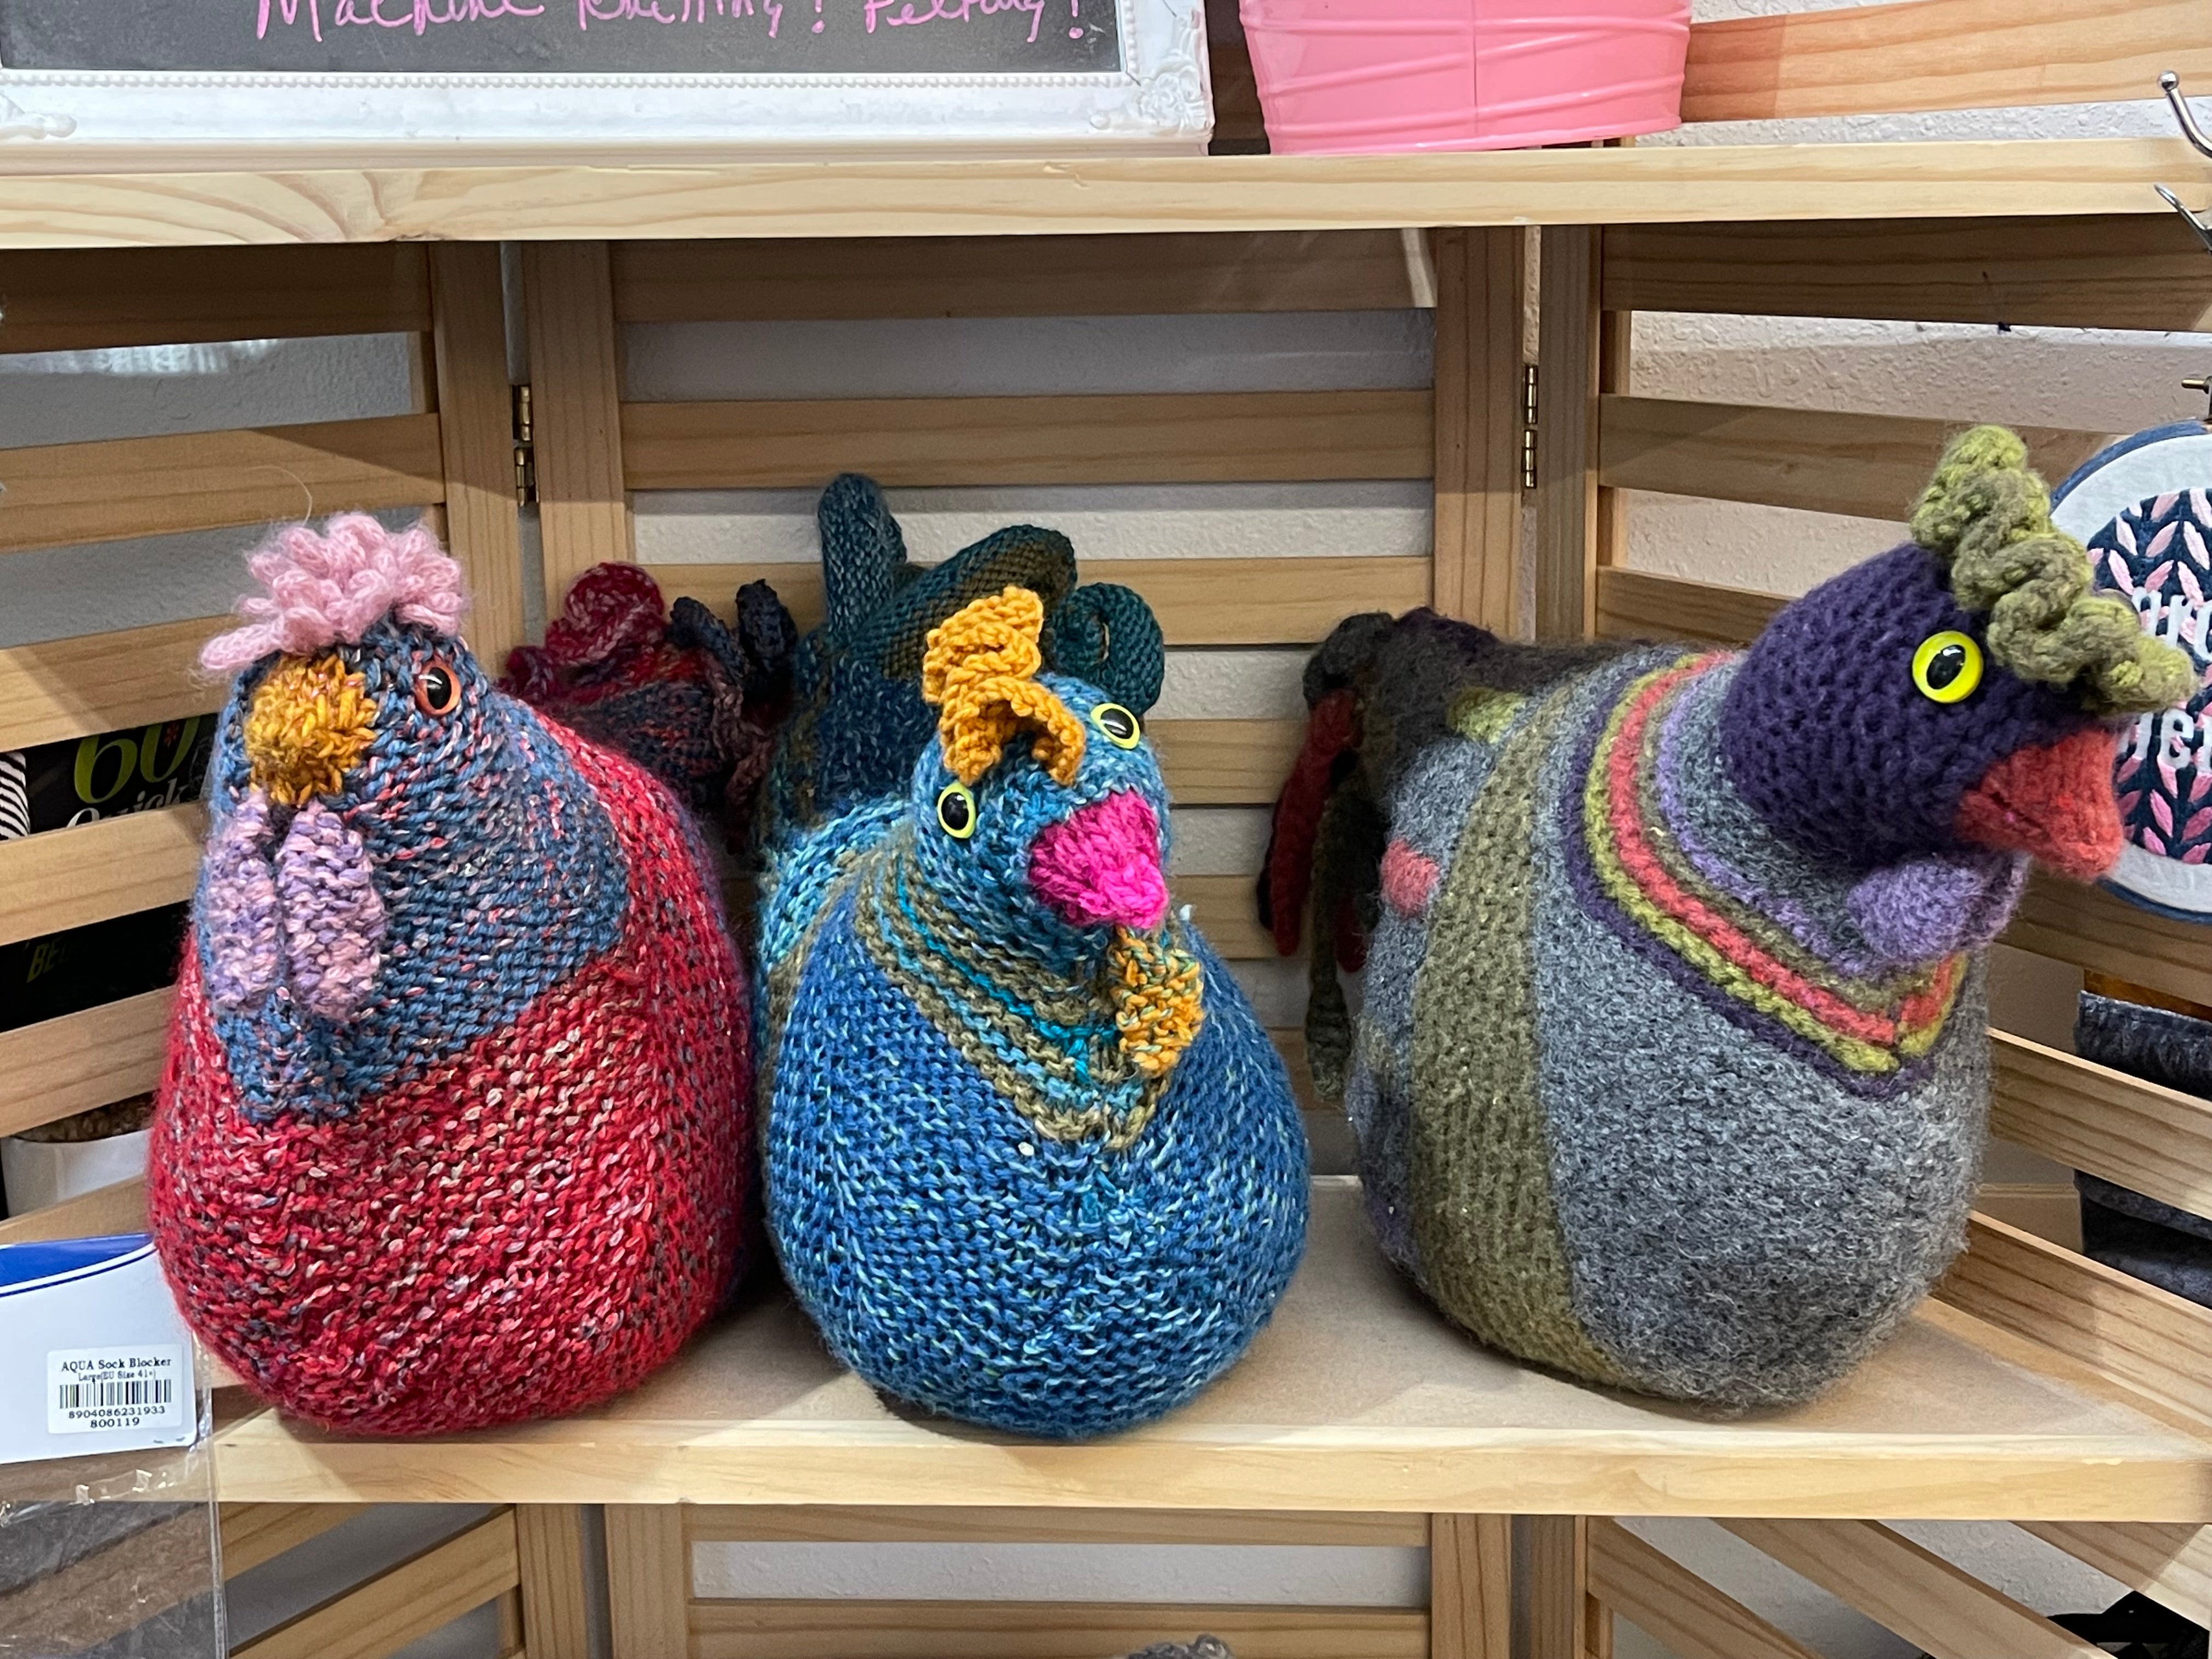 Crochet Support Chicken, emotional support, squeeze away worry